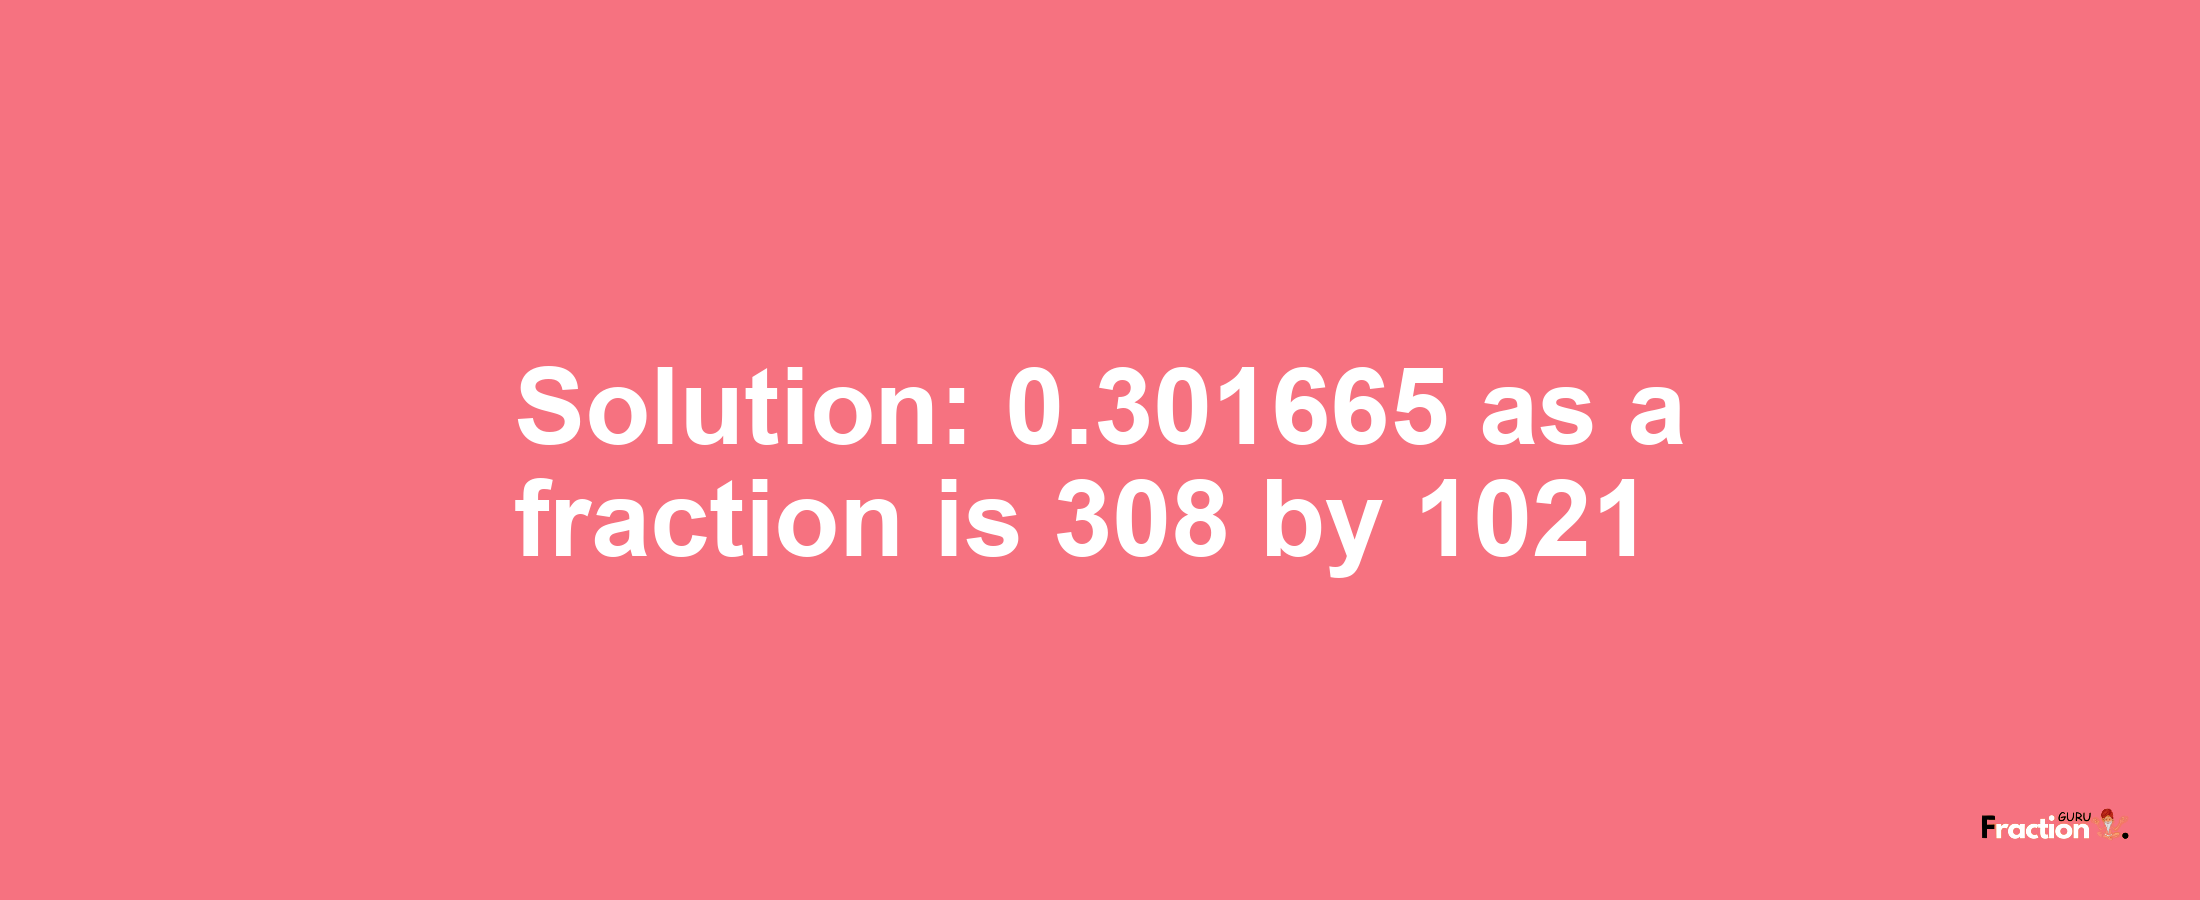 Solution:0.301665 as a fraction is 308/1021